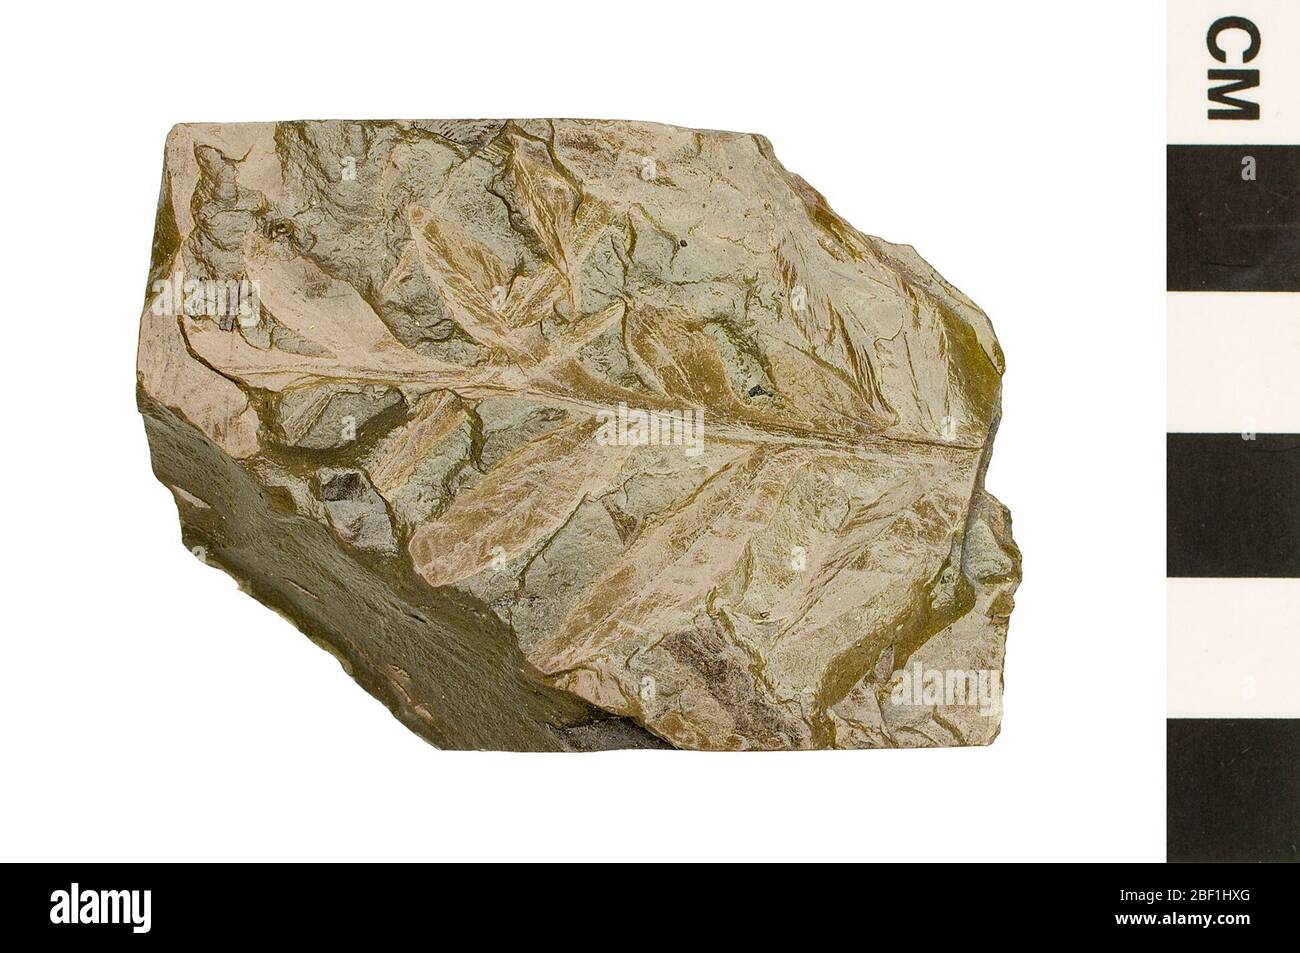 Seed Fern. This object is part of the Education and Outreach collection, some of which are in the Q?rius science education center and available to see.Mesozoic - Triassic114 Jan 2020Blackstone Stock Photo